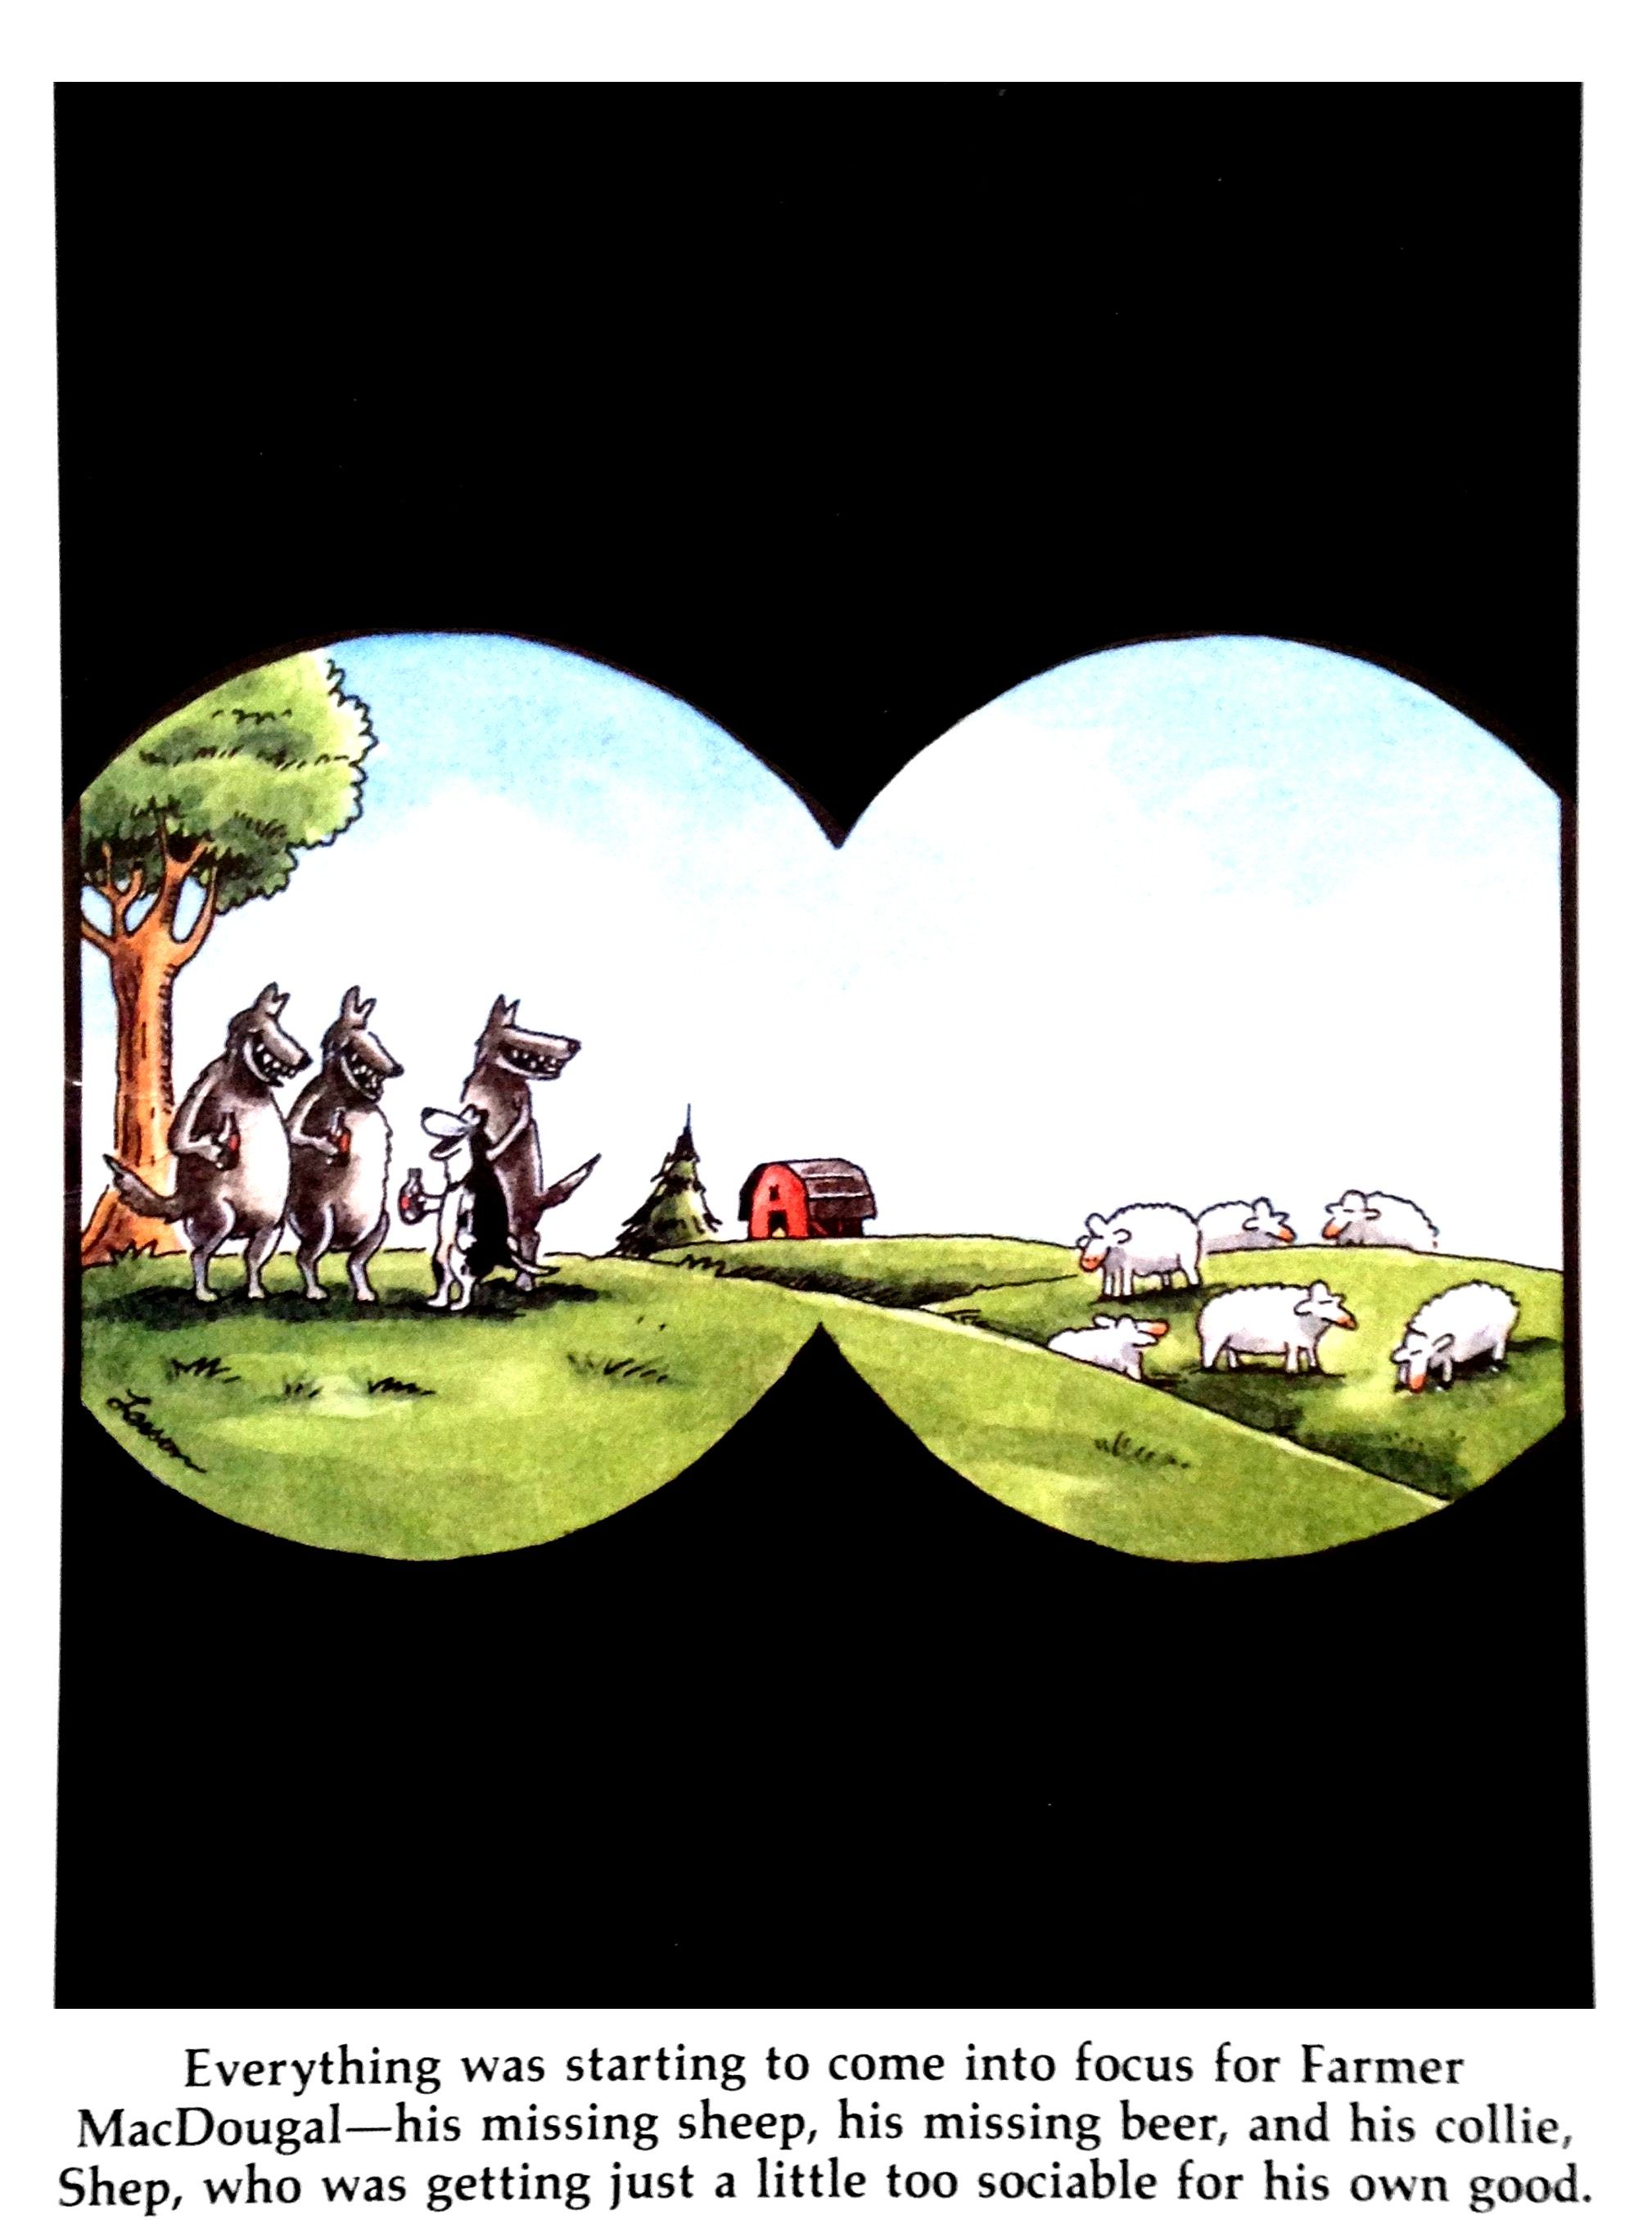 the far side comic shephard discovers his collie shep is helping wolves steal sheep